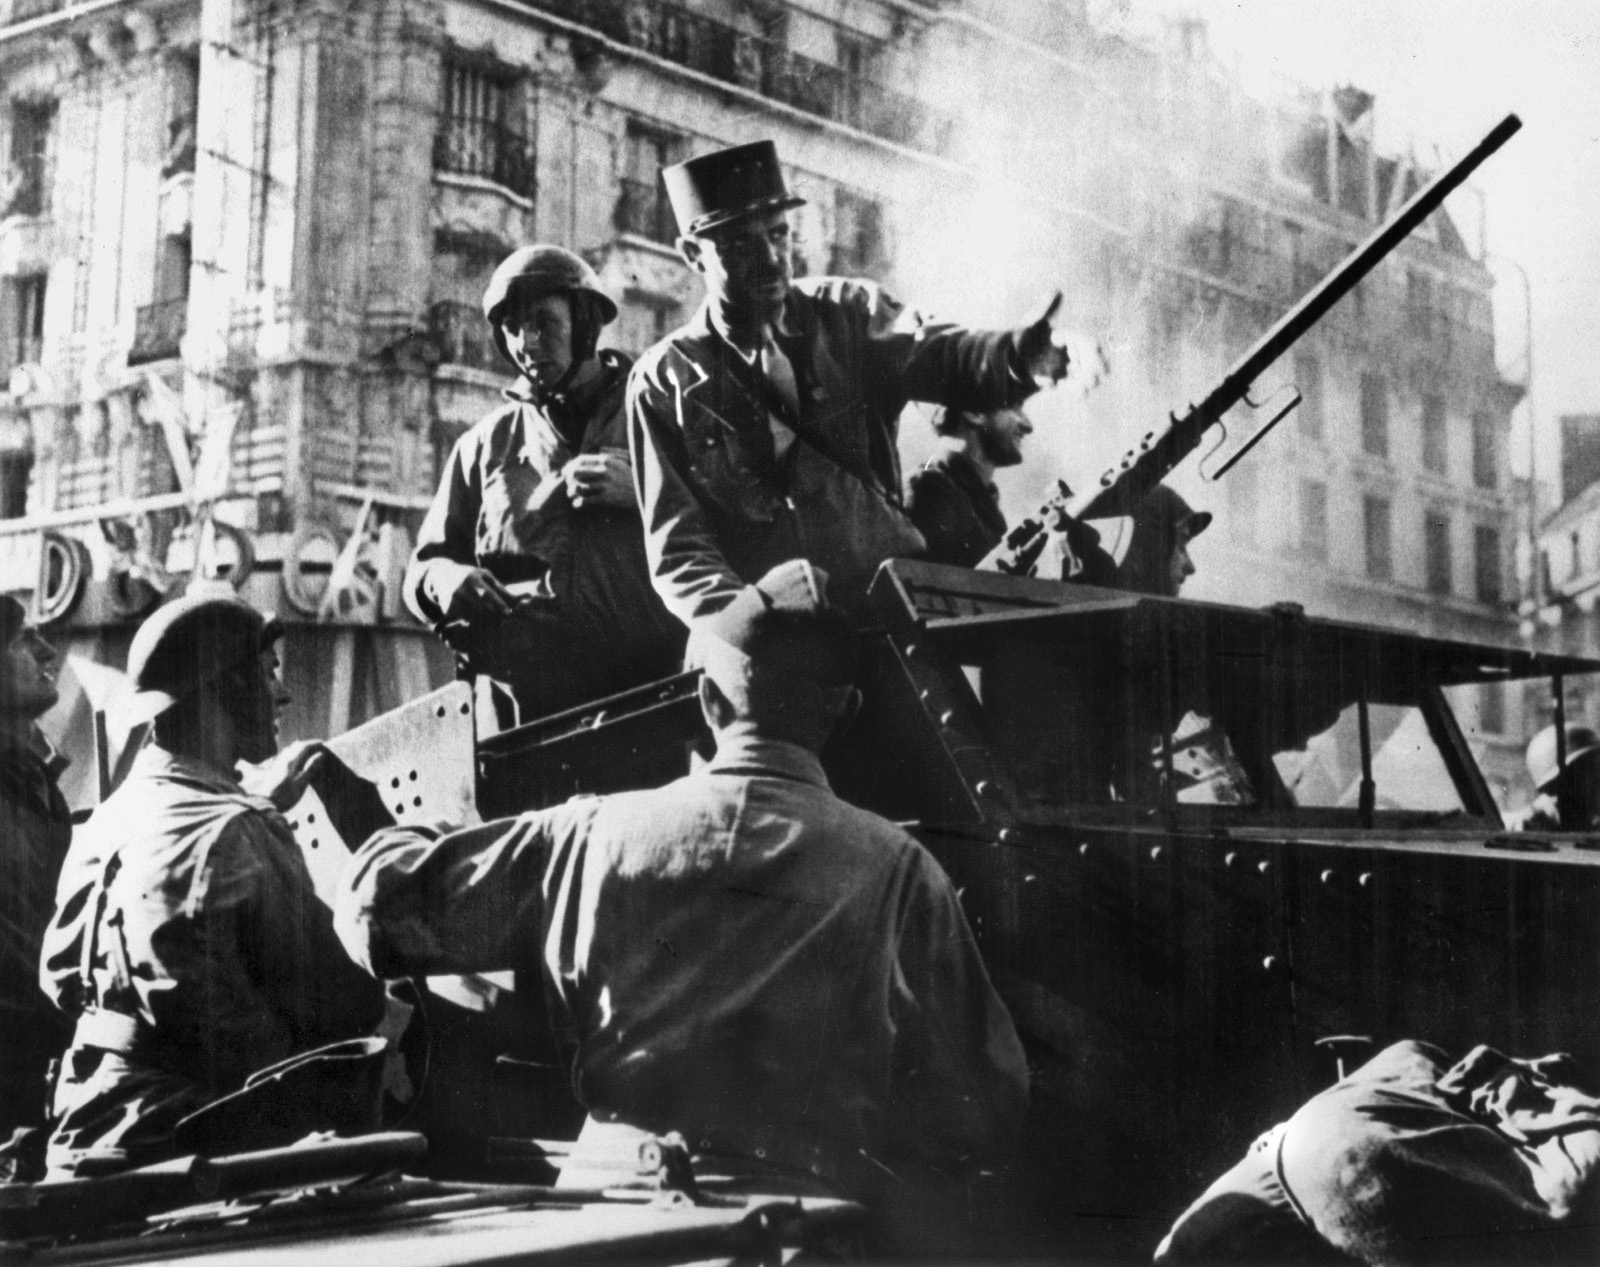 Maj. Gen. Jacques Leclerc, commander of the 2nd Free French Armored Division, gives commands to Free French forces during the liberation of Paris, August 25, 1944.